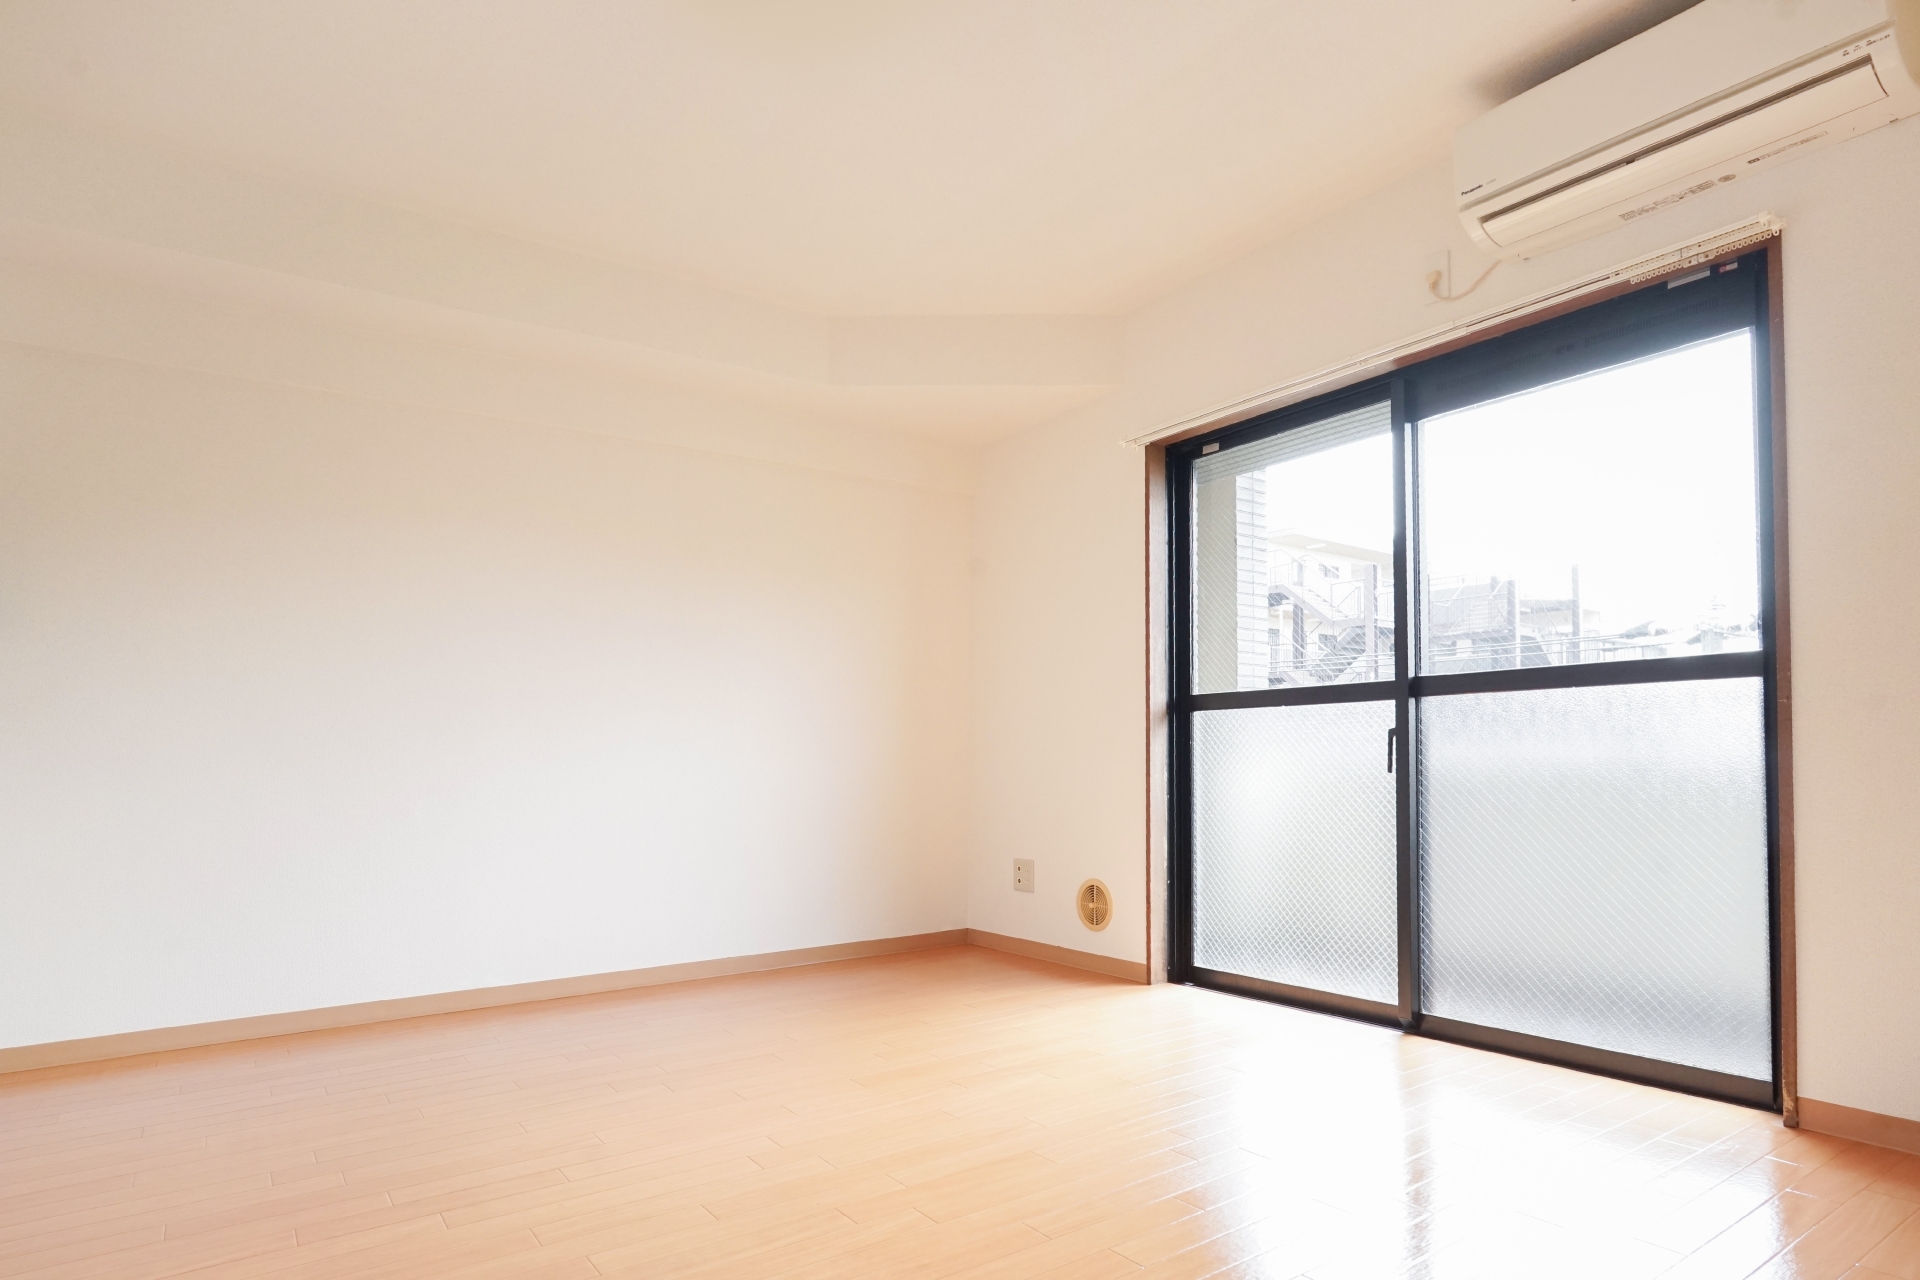 Tips for Renting an Apartment in Japan